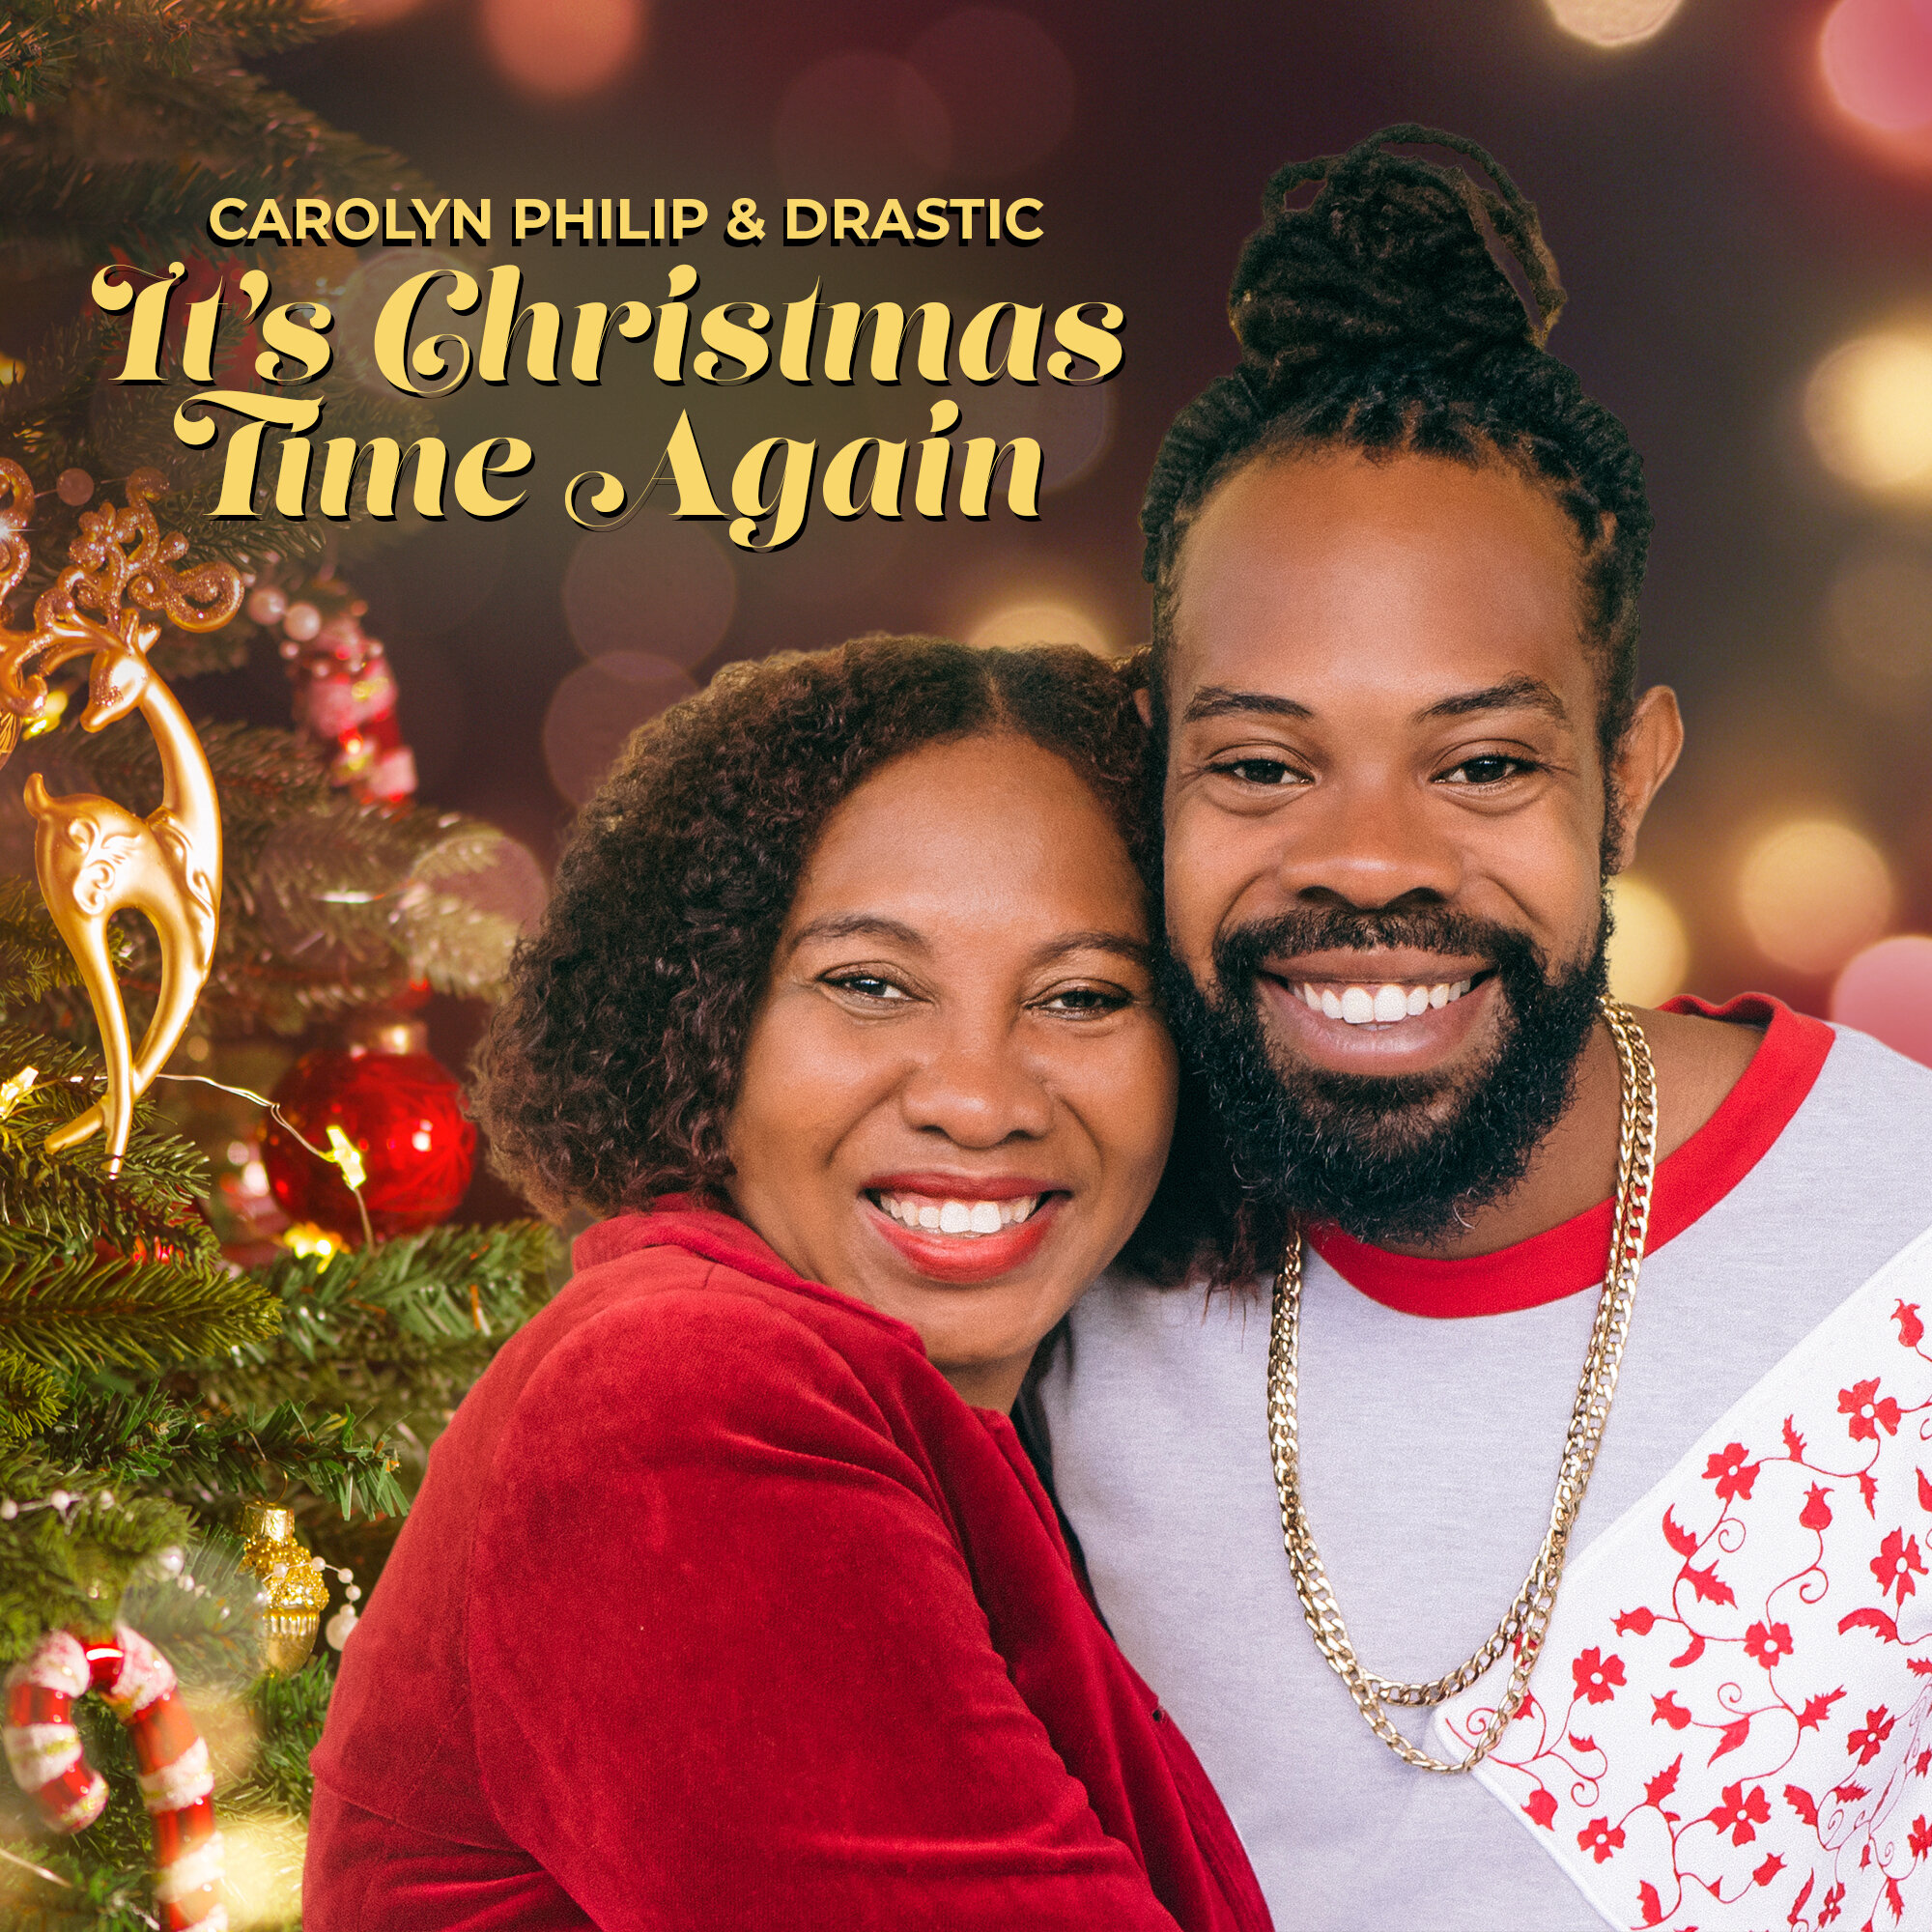 Drastic and Carolyn Philip It's Christmas Time Again